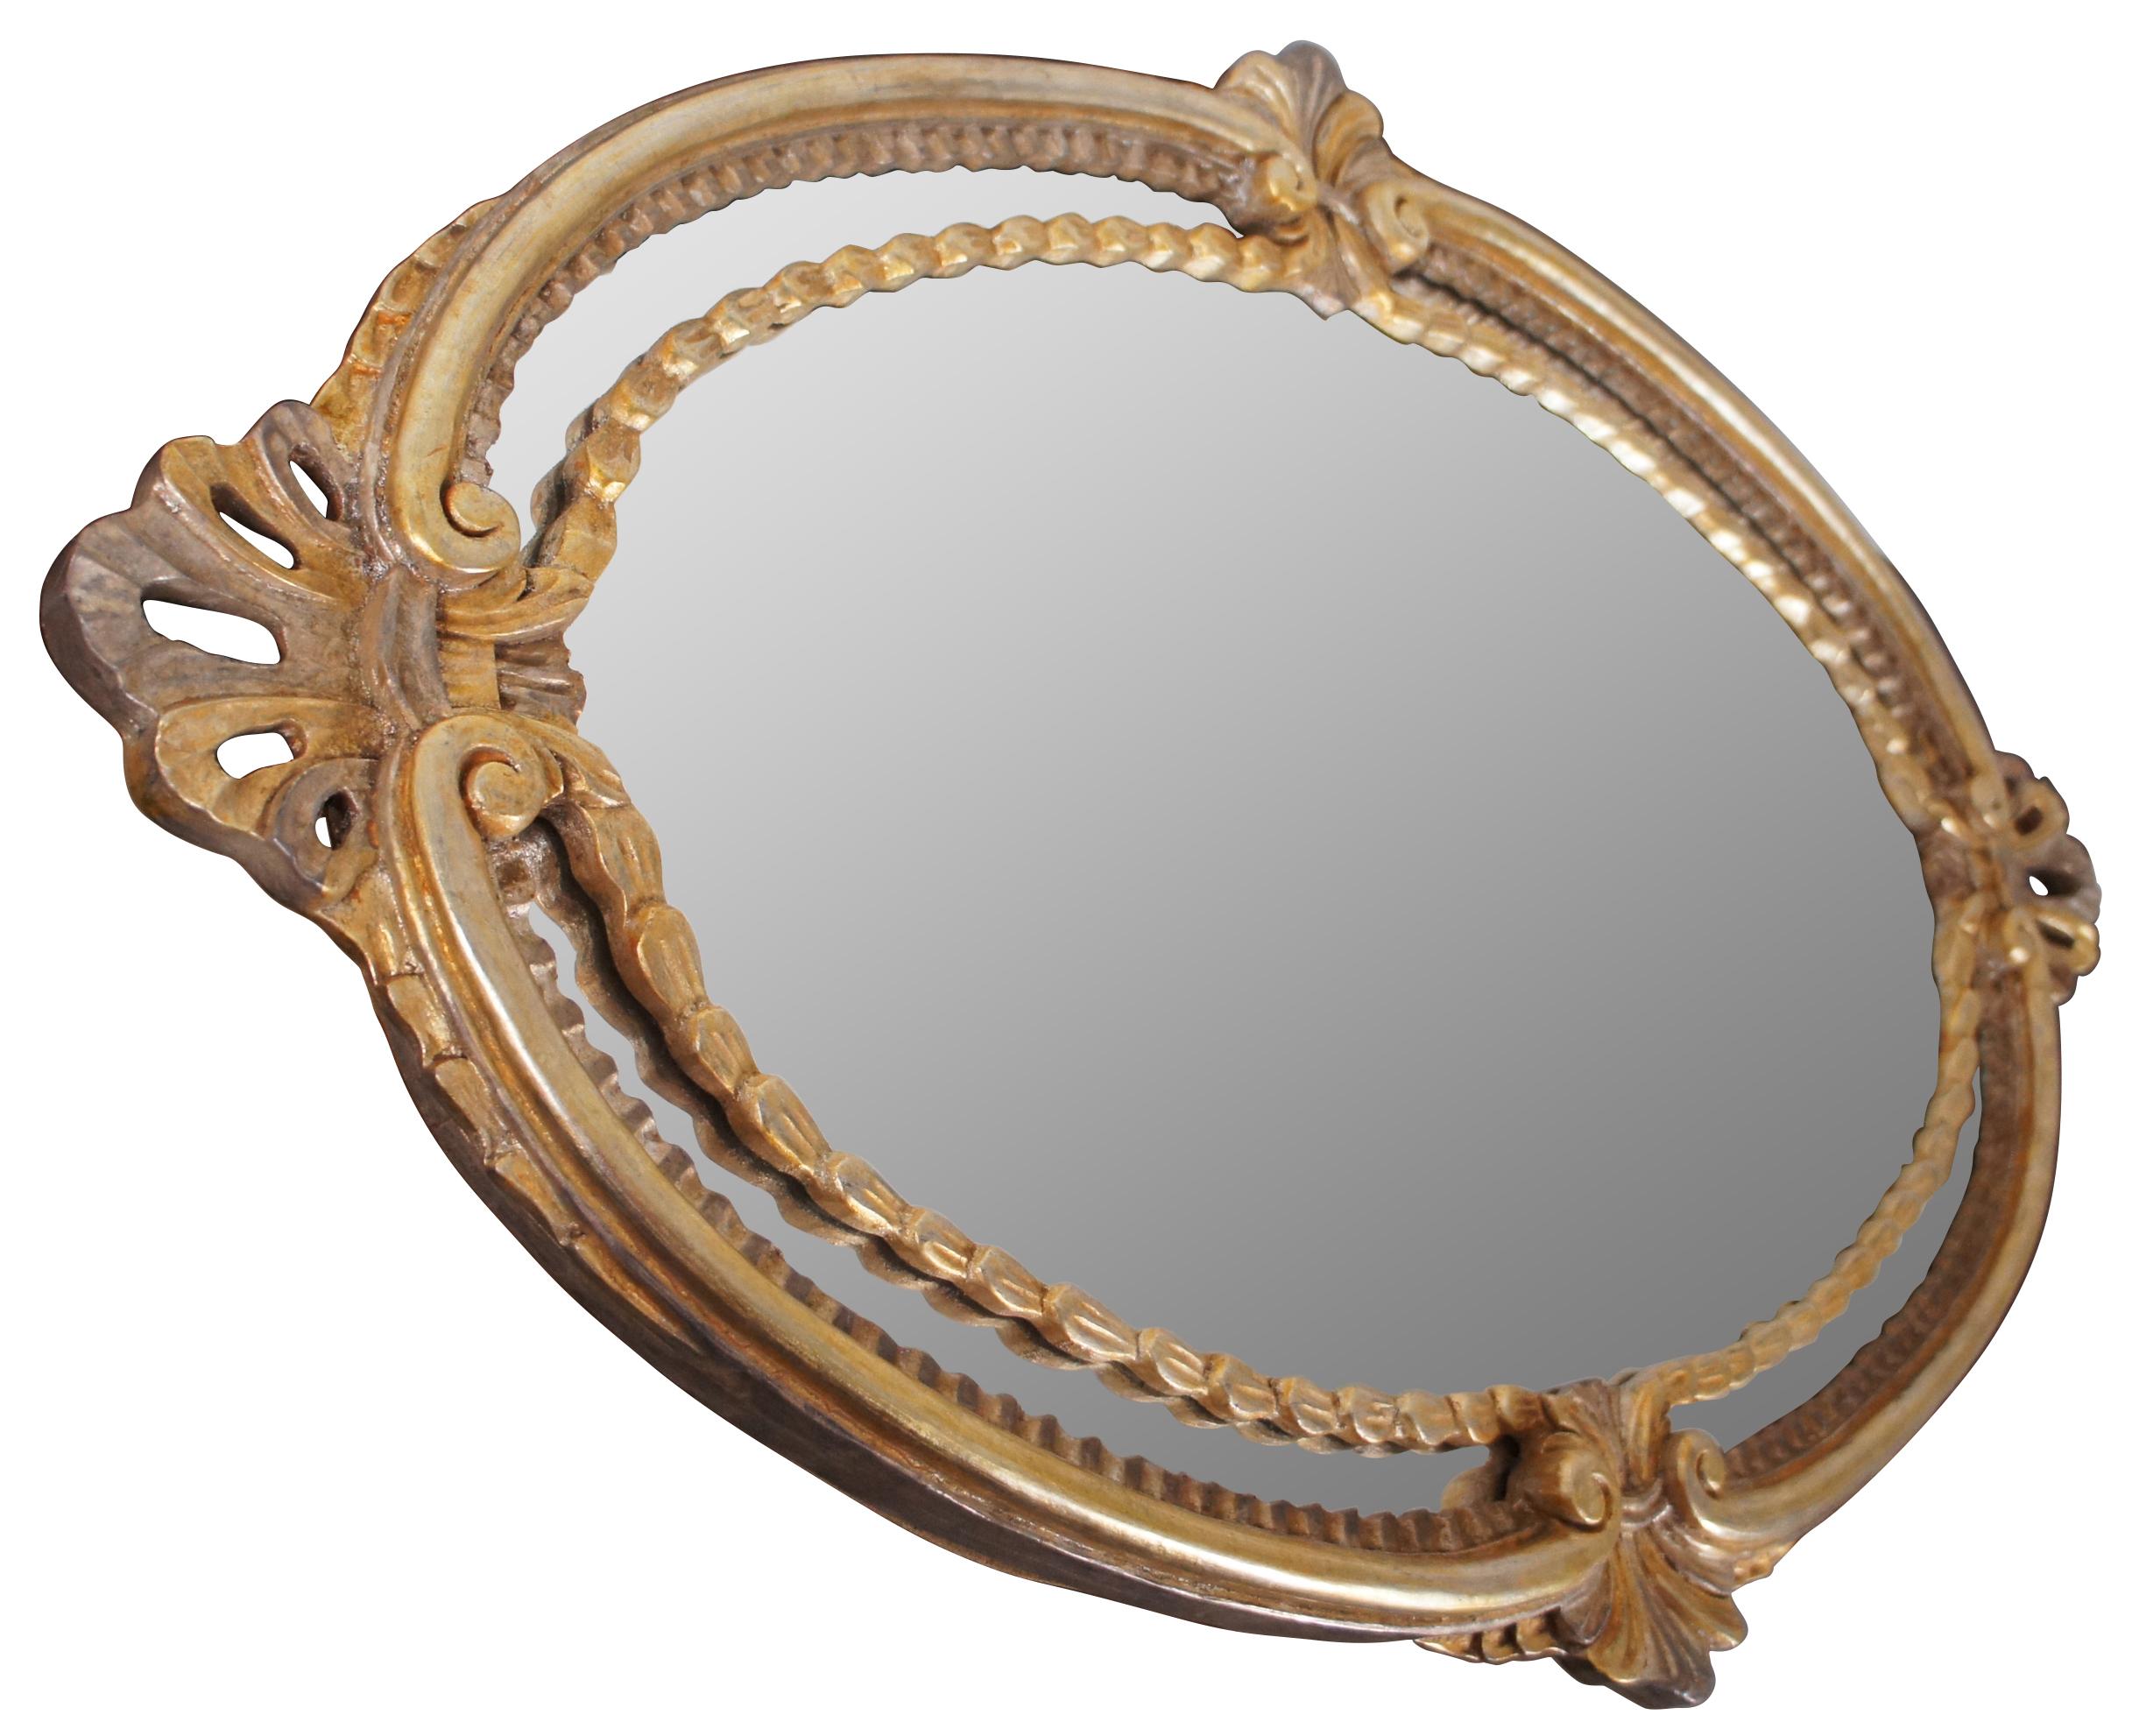 Vintage La Barge over mantel or vanity mirror. Made in Italy featuring Hollywood Regency style and ornate scalloped design.
 